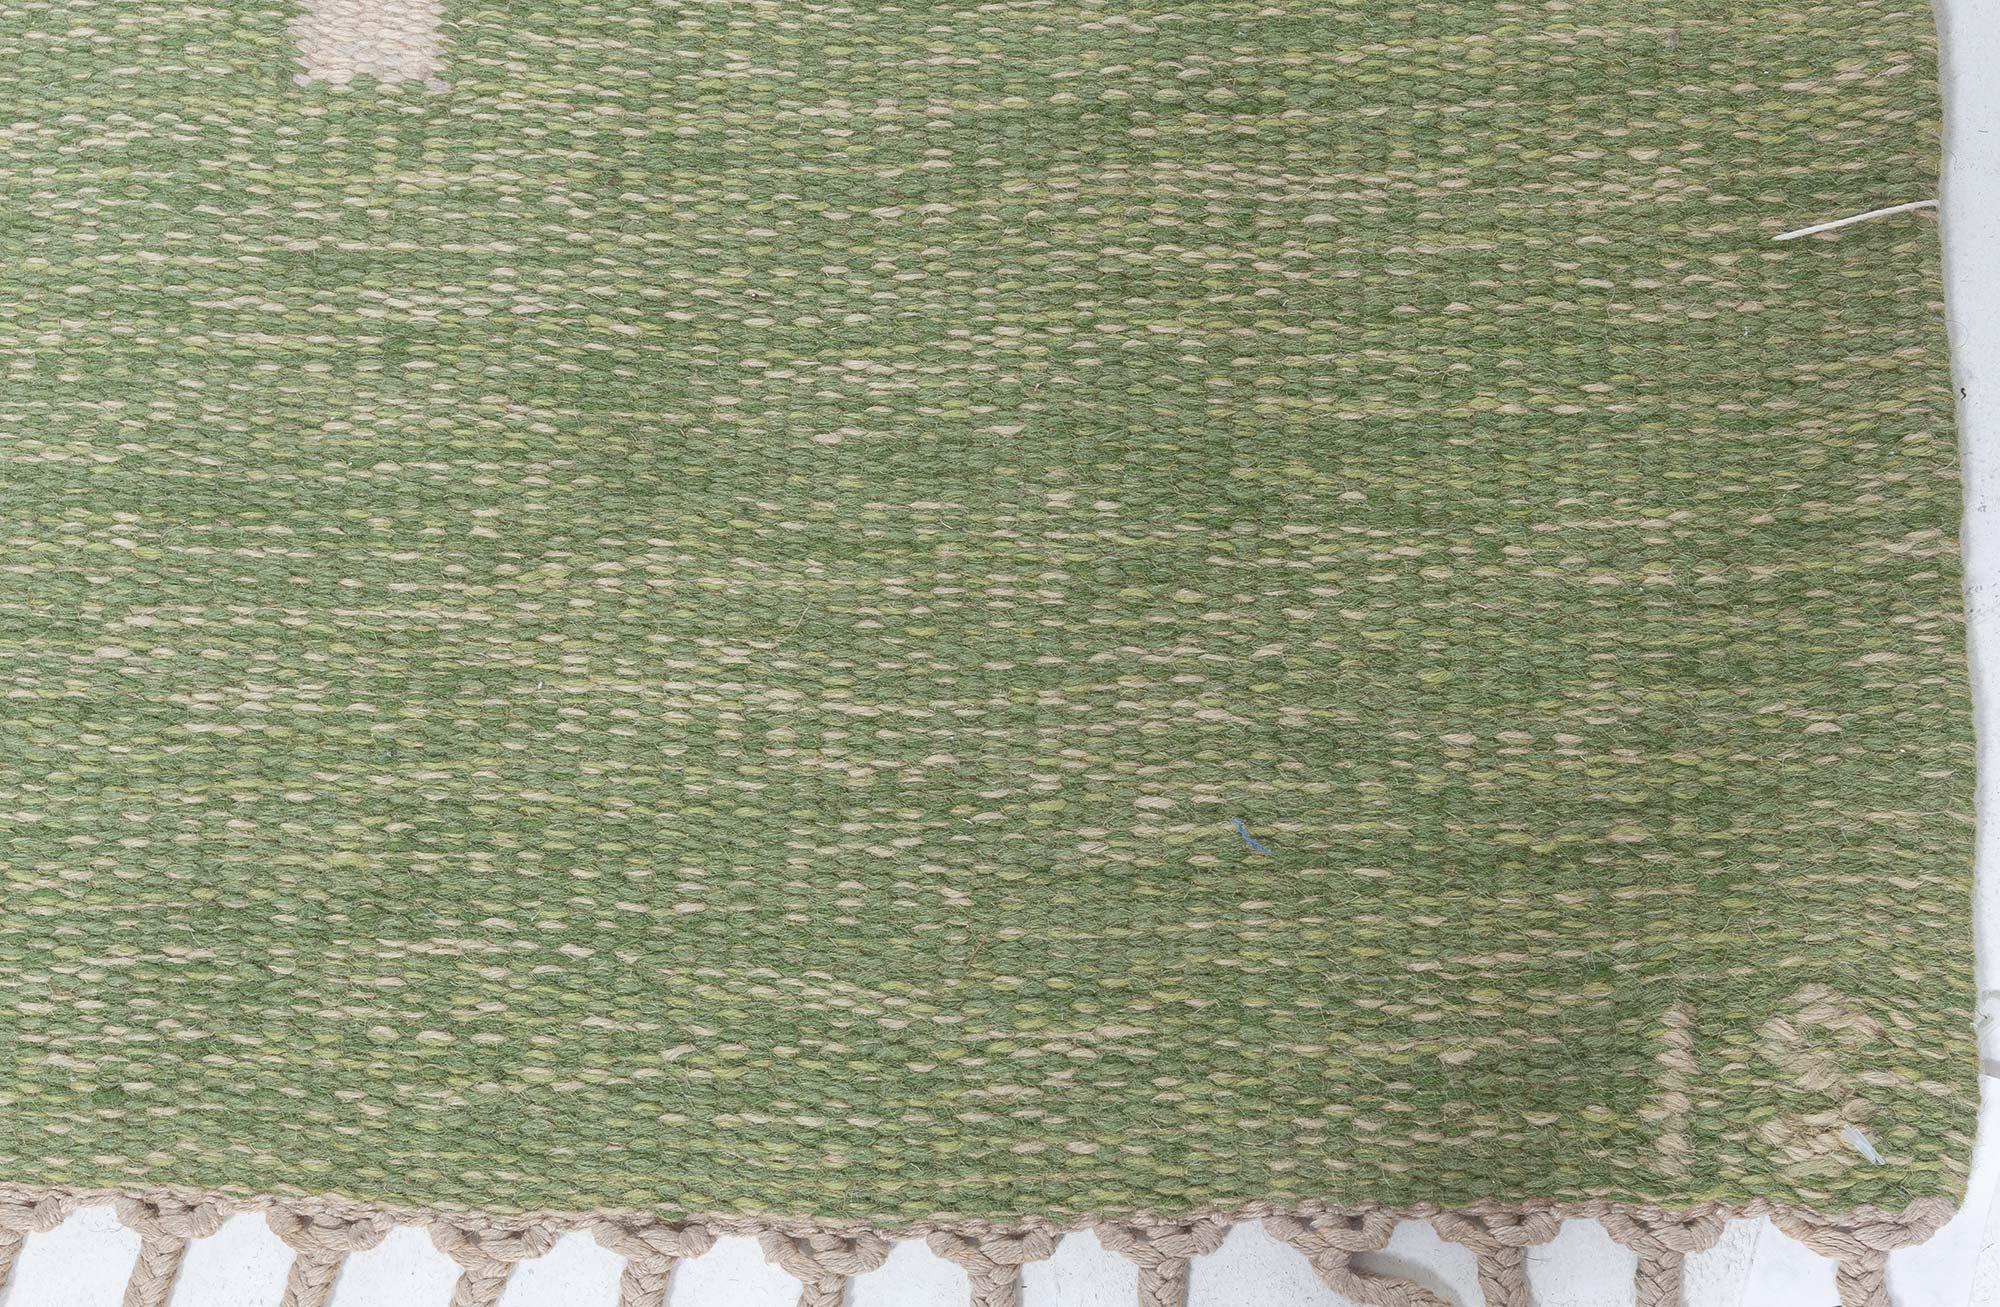 European Mid-20th Century Swedish Pea Green Background Flat Weave Rug by Ingegerd Silow For Sale